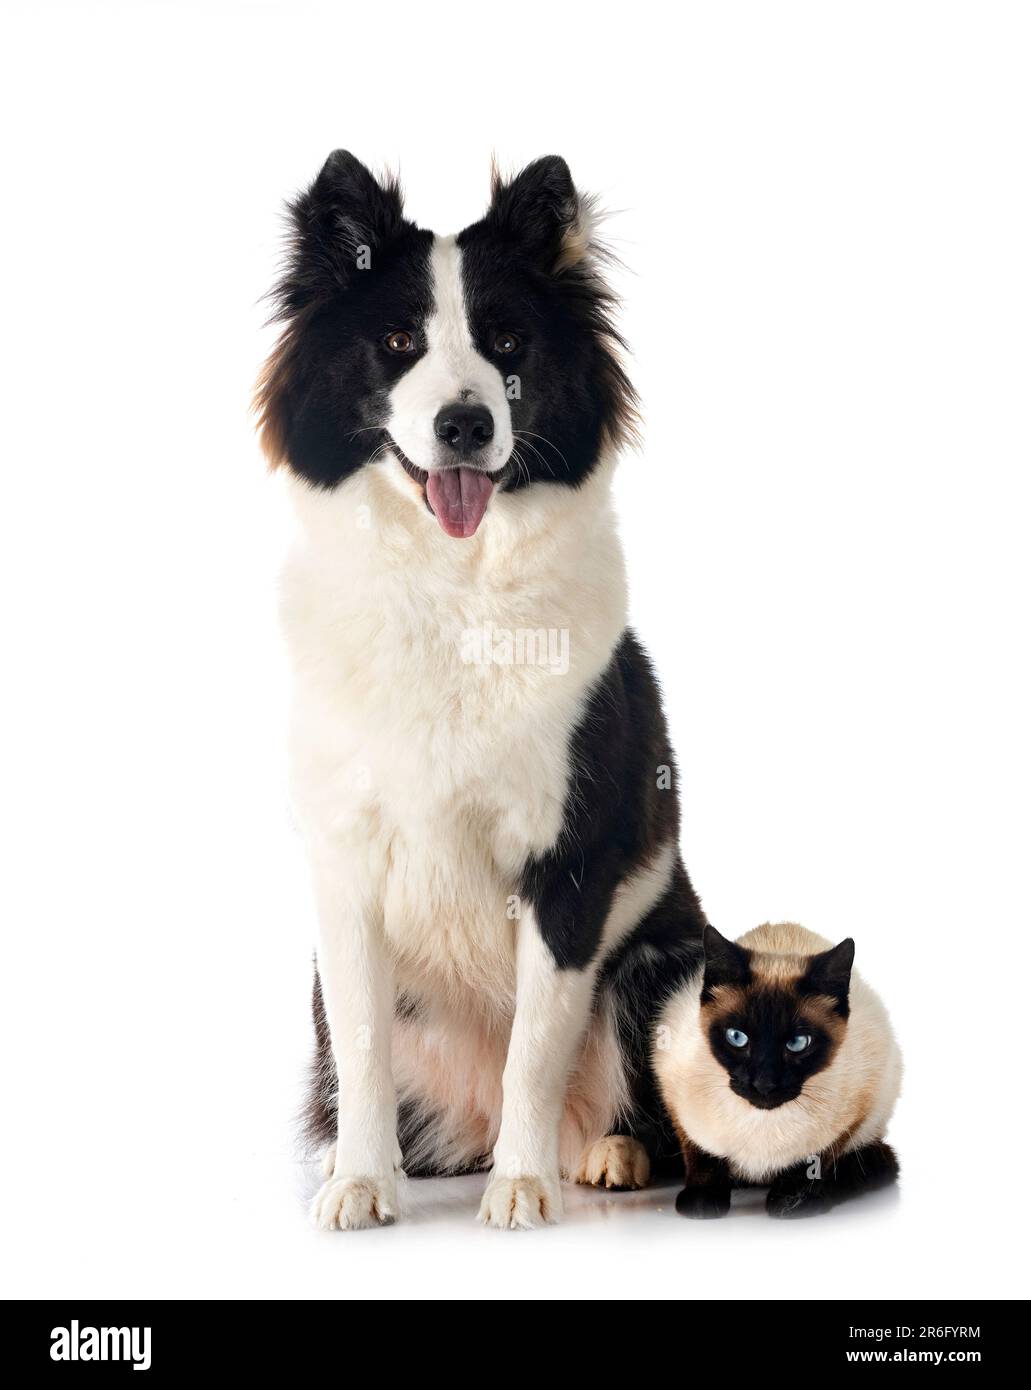 Finnish Lapphund and cat in front of white background Stock Photo